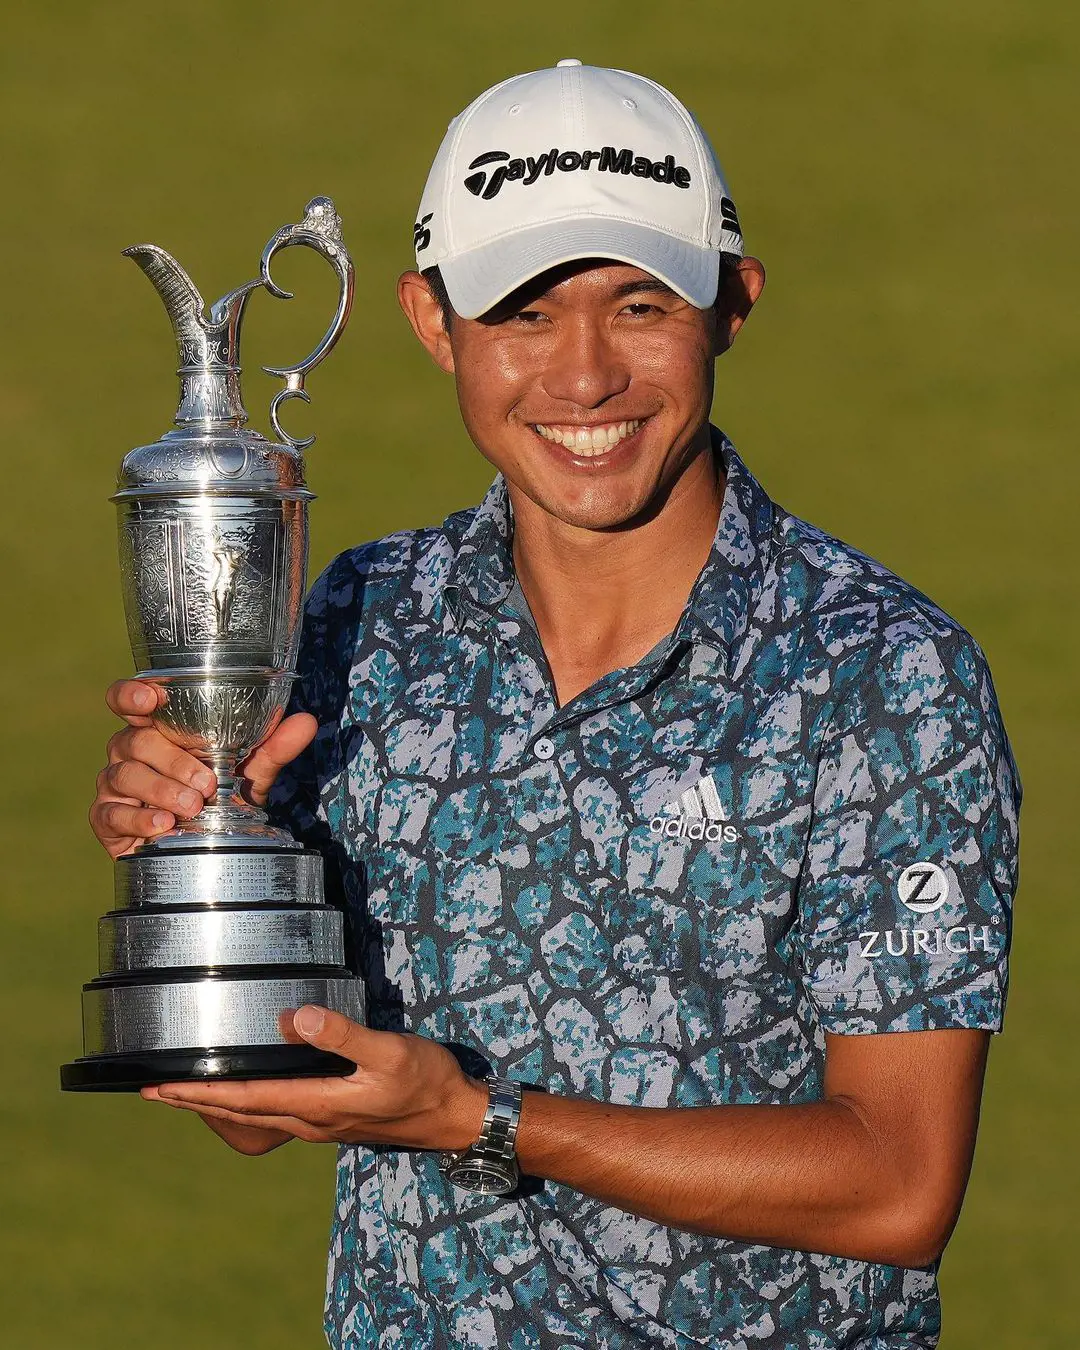 Collin holding Champion Golfer of the Year Trophy at Royal St George's Golf Club on July 19, 2021.